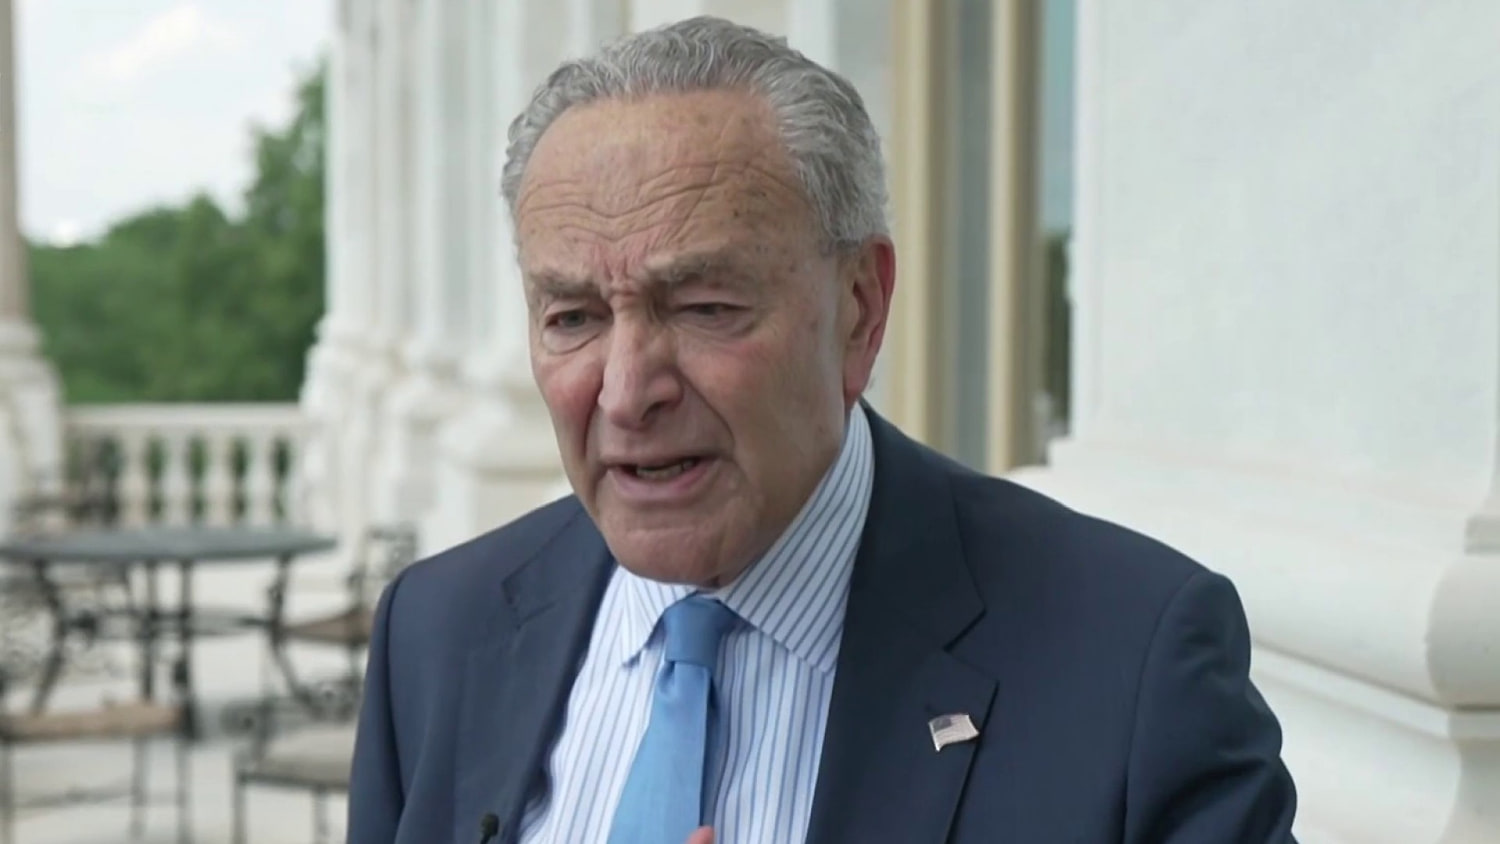 Schumer: Democrats have to make clear how ‘ludicrous’ and ‘unhinged’ the Trump-Vance ticket is